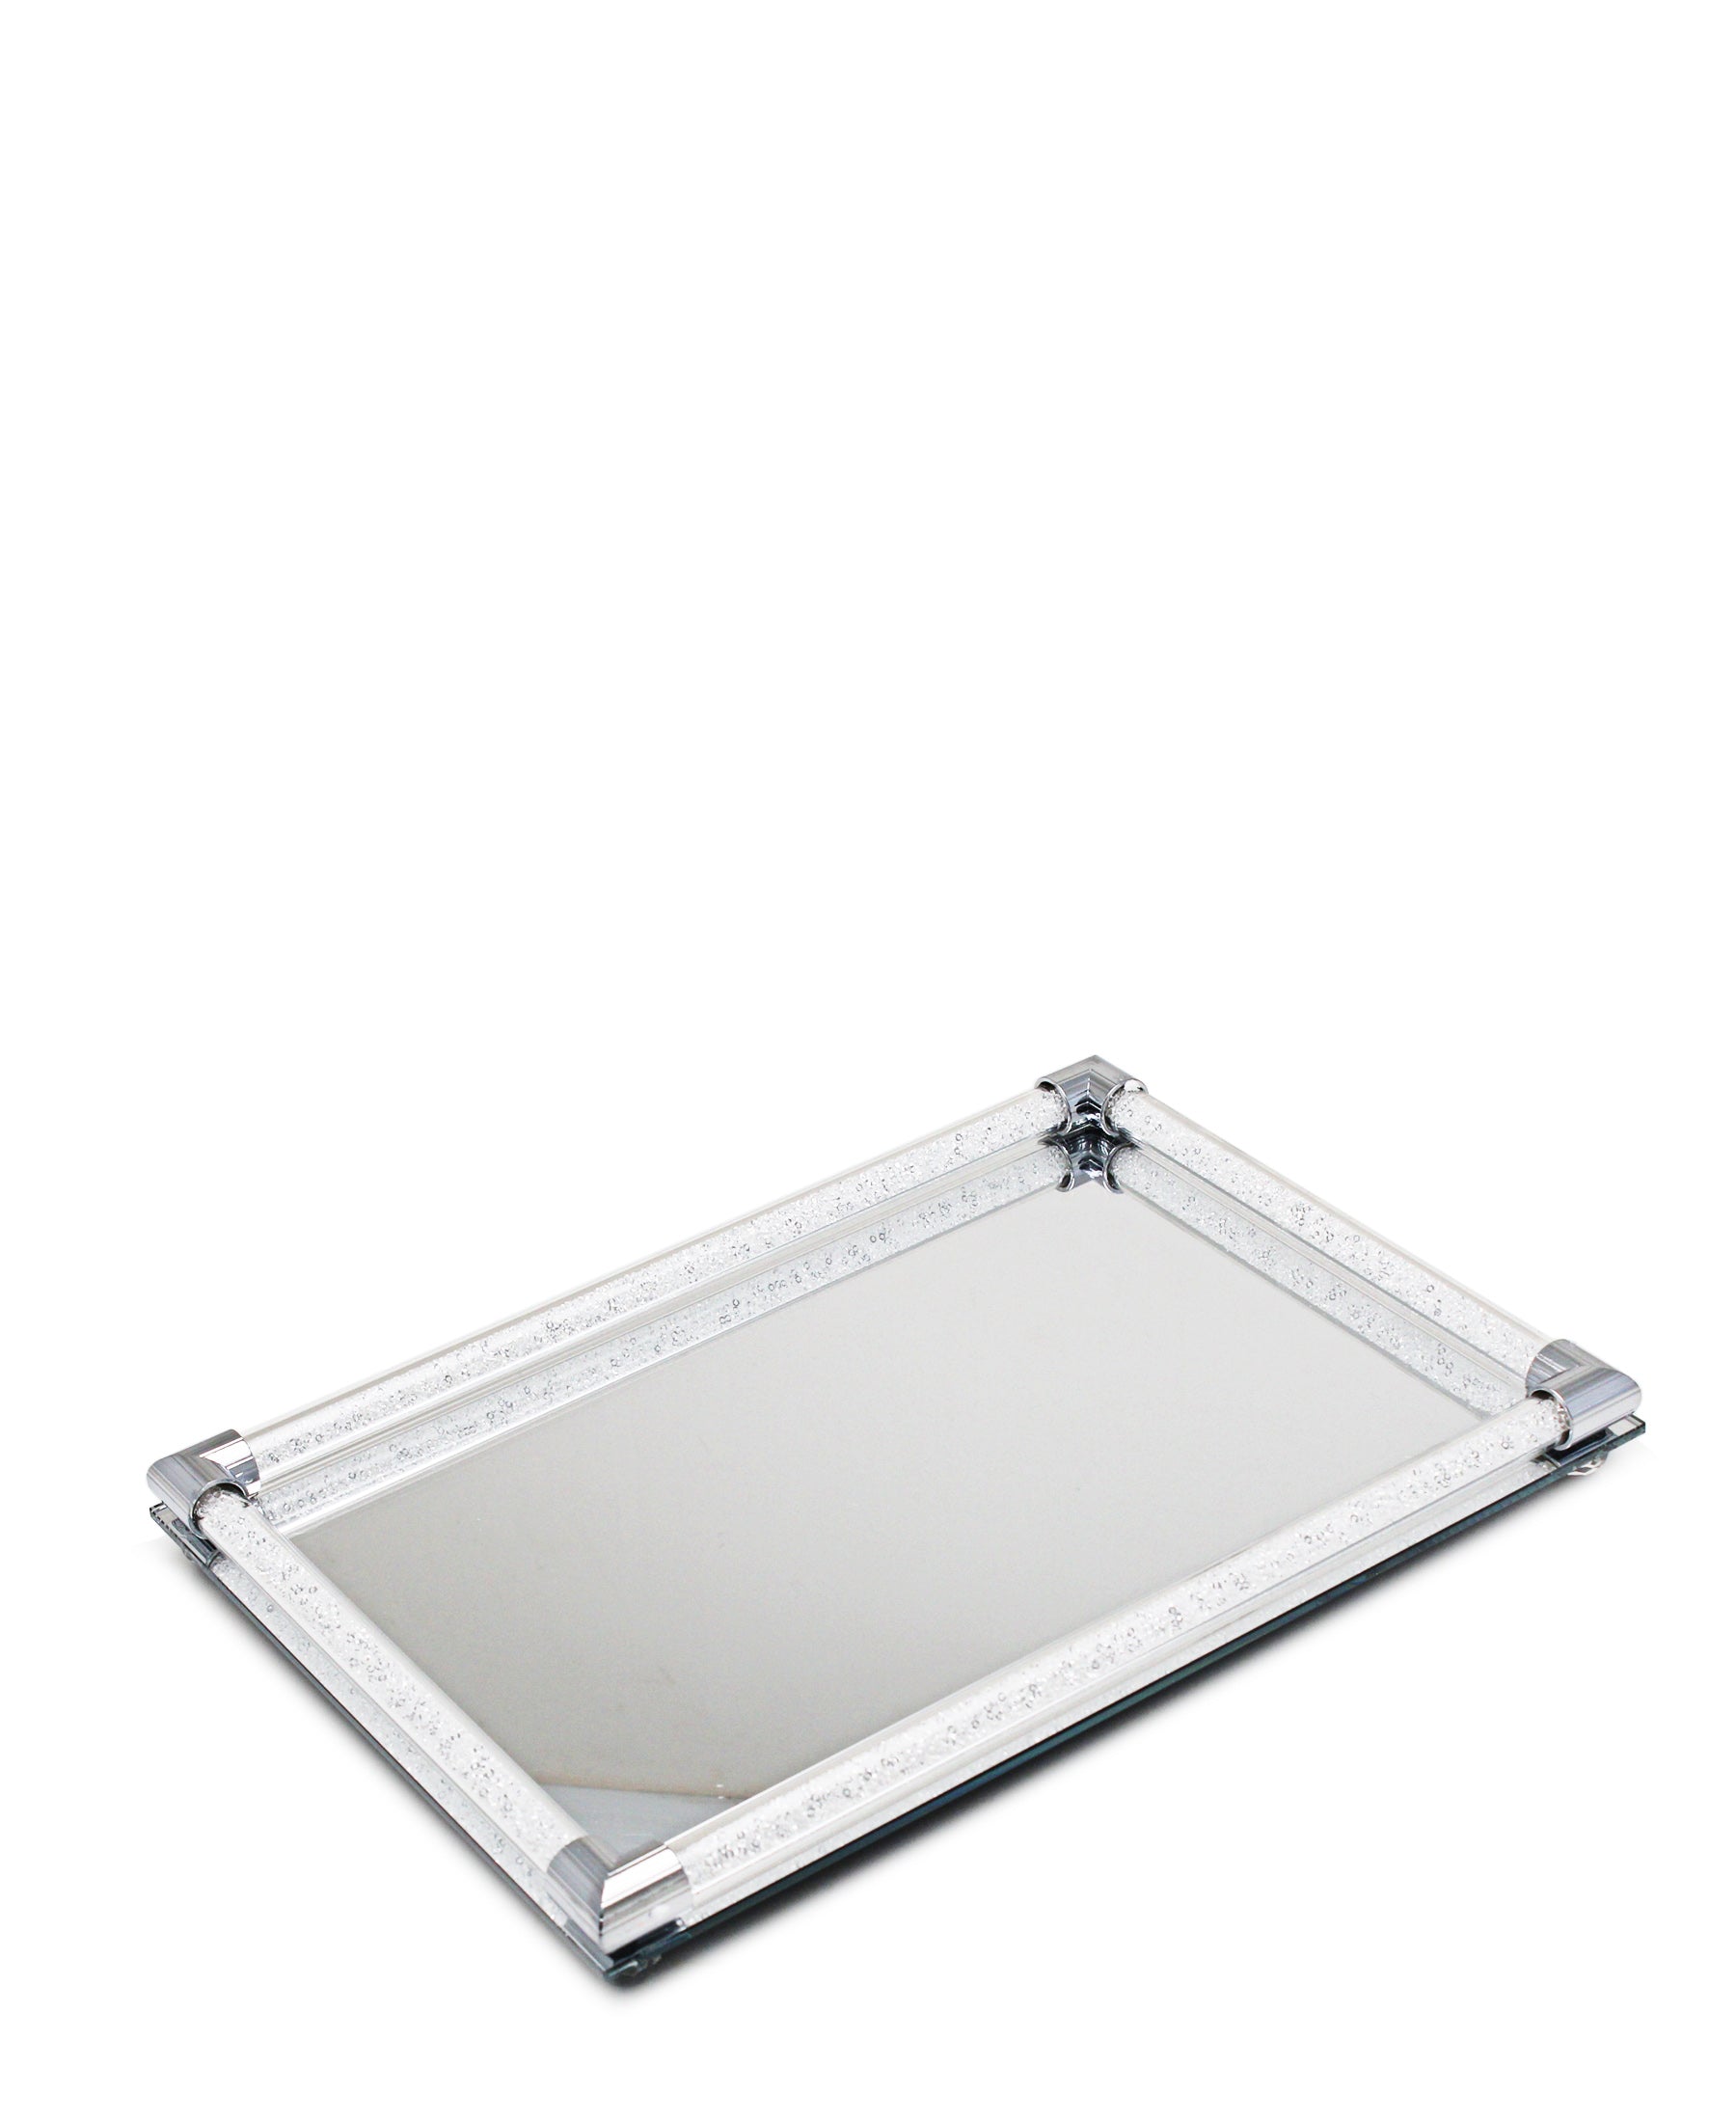 Kitchen Life Mirror Tray With Crystal Handle 34cm - Silver